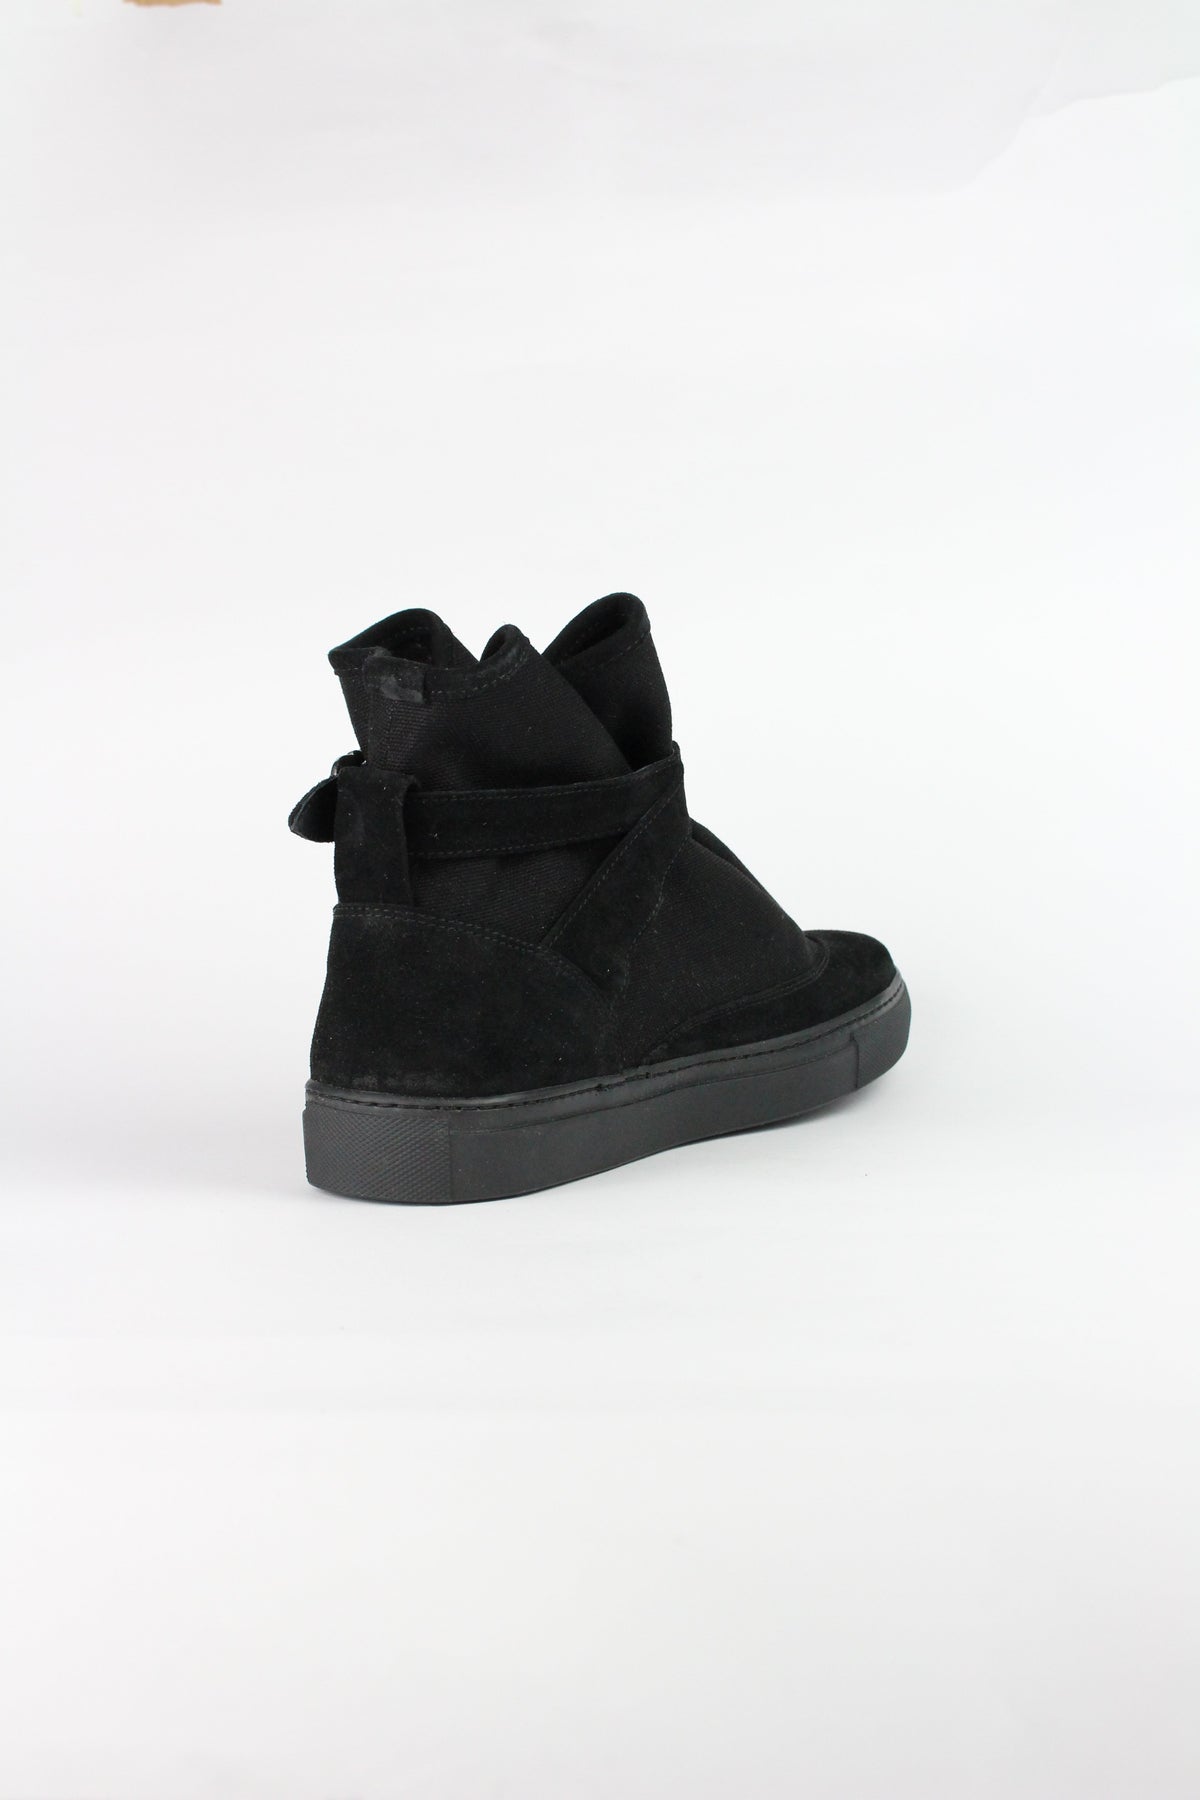 HIGHPAD SNEAKER BLACK CANVAS W/ SUEDE-shoes-A Child Of The Jago